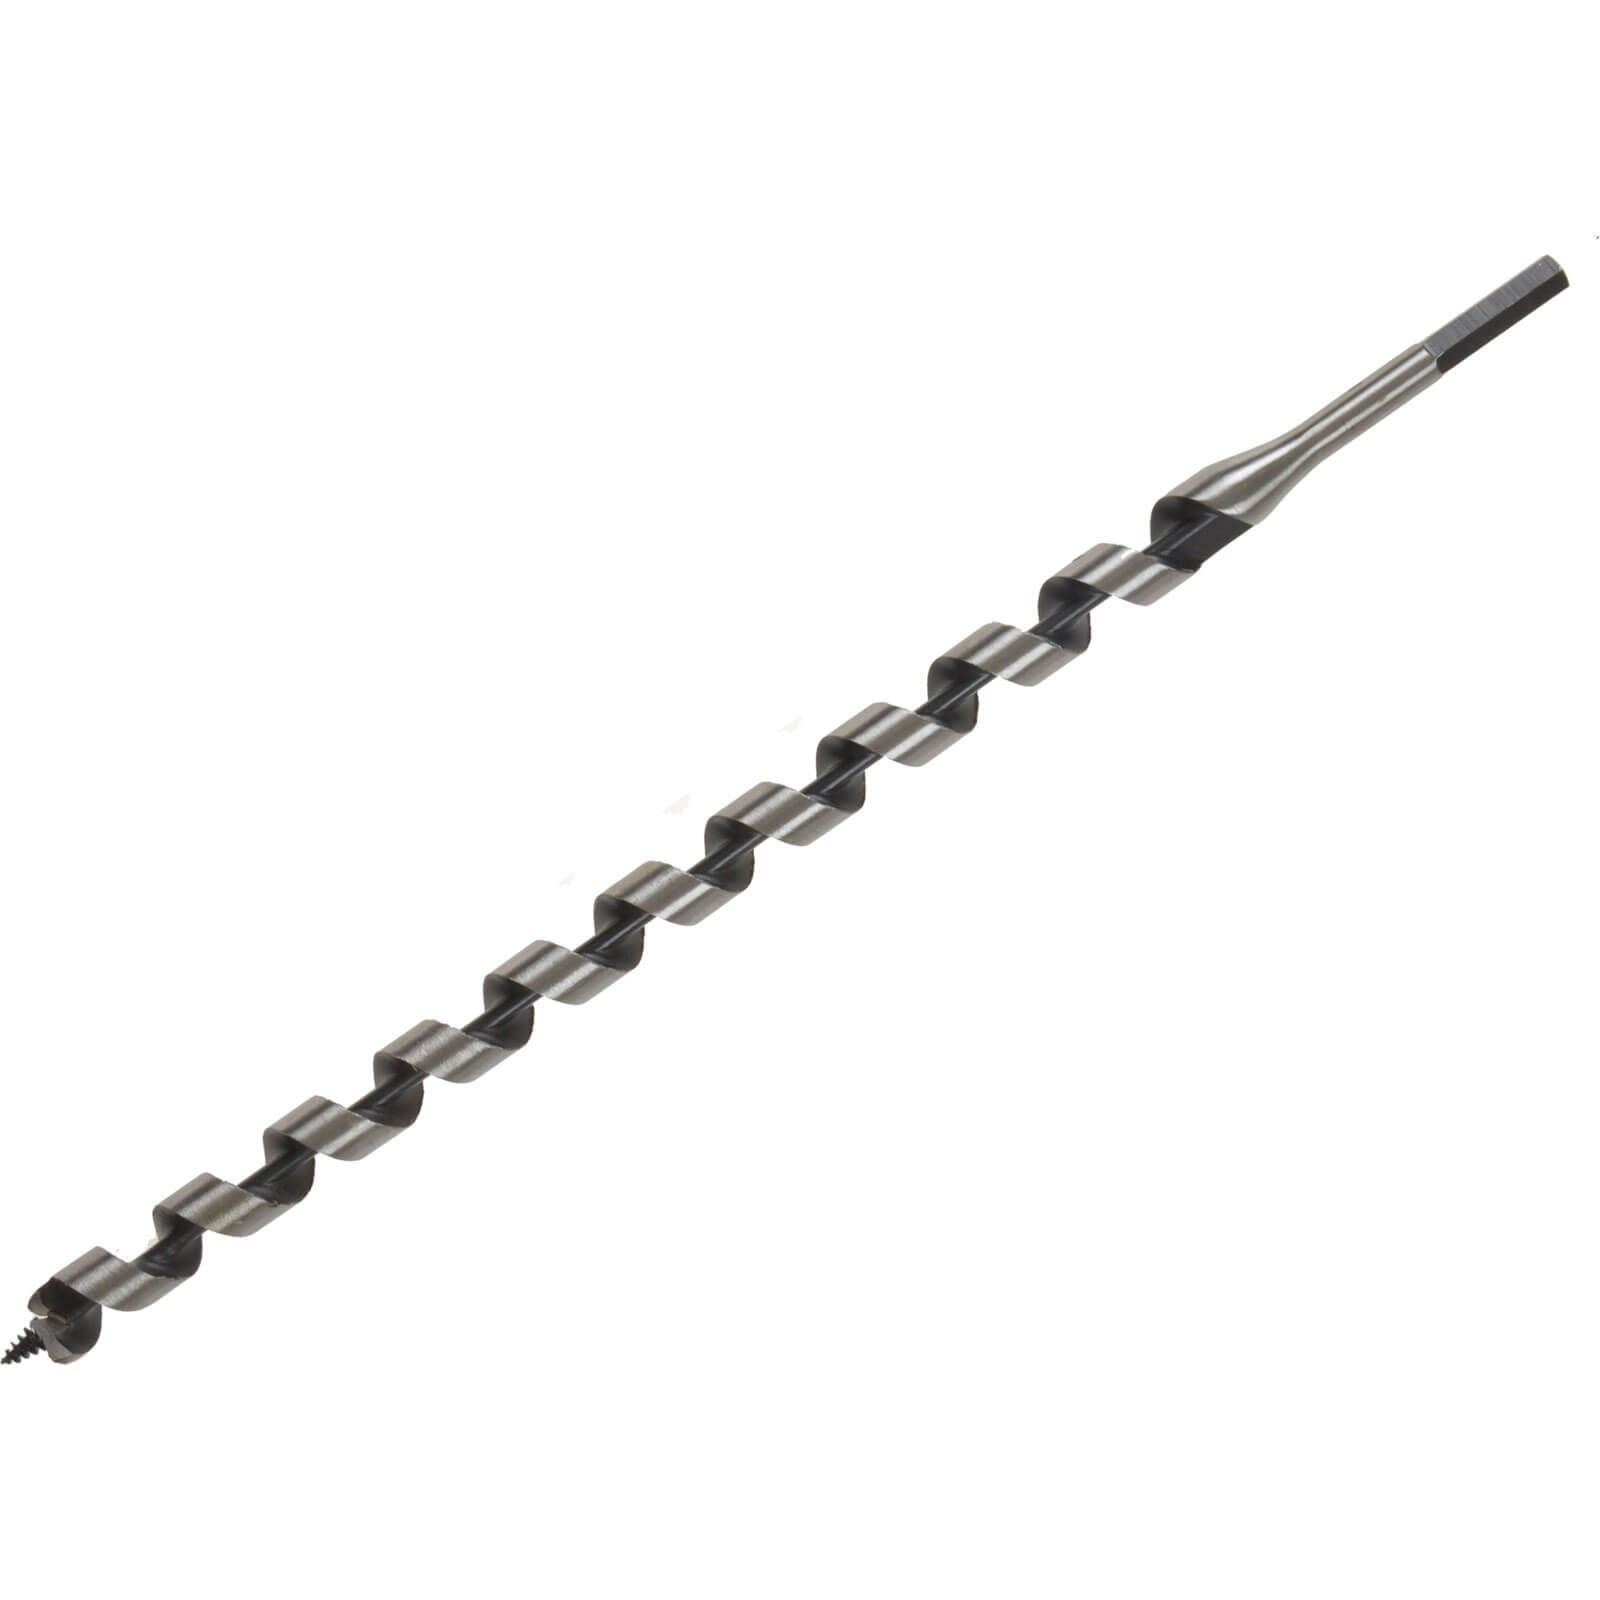 Image of Irwin Wood Auger Drill Bit 18mm 400mm